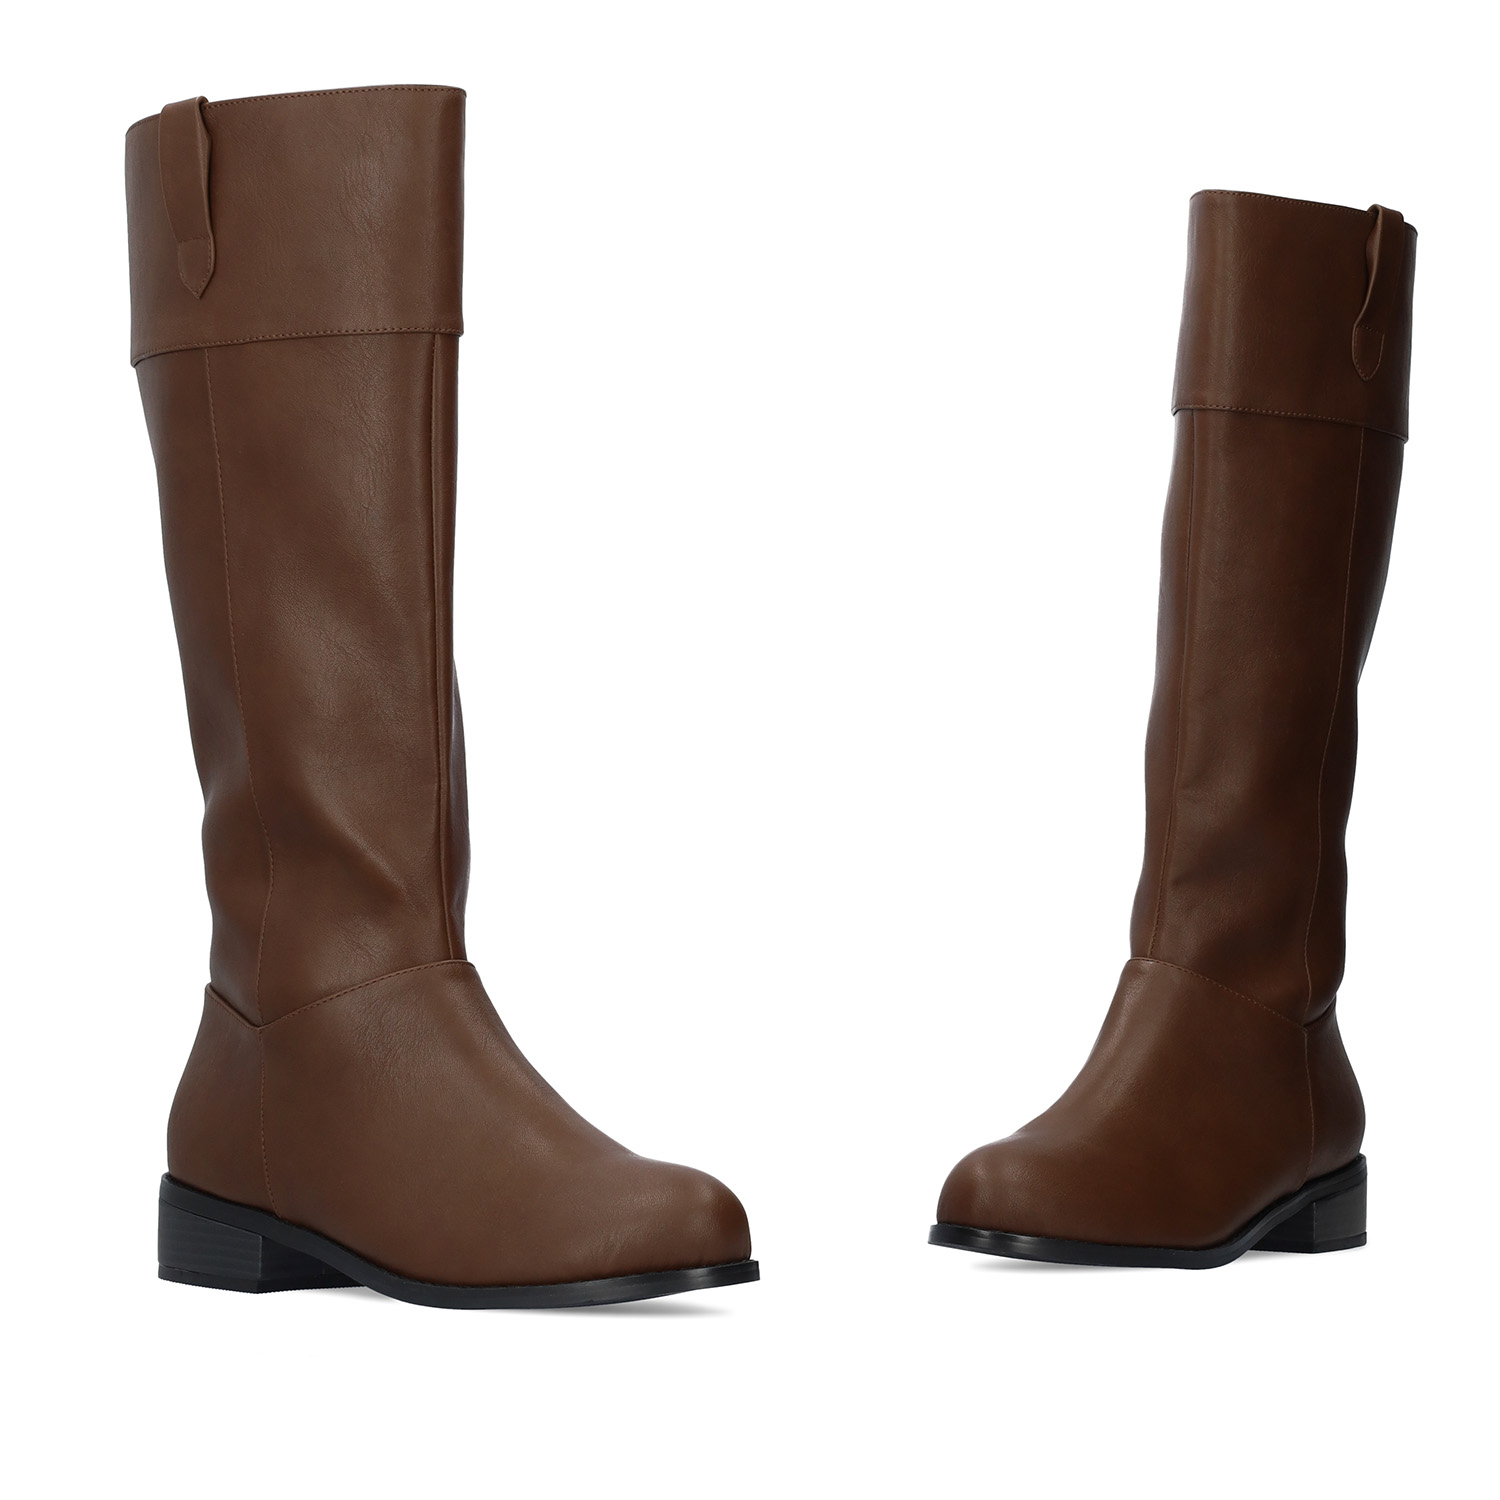 Flat high-calf boots in brown faux leather. 